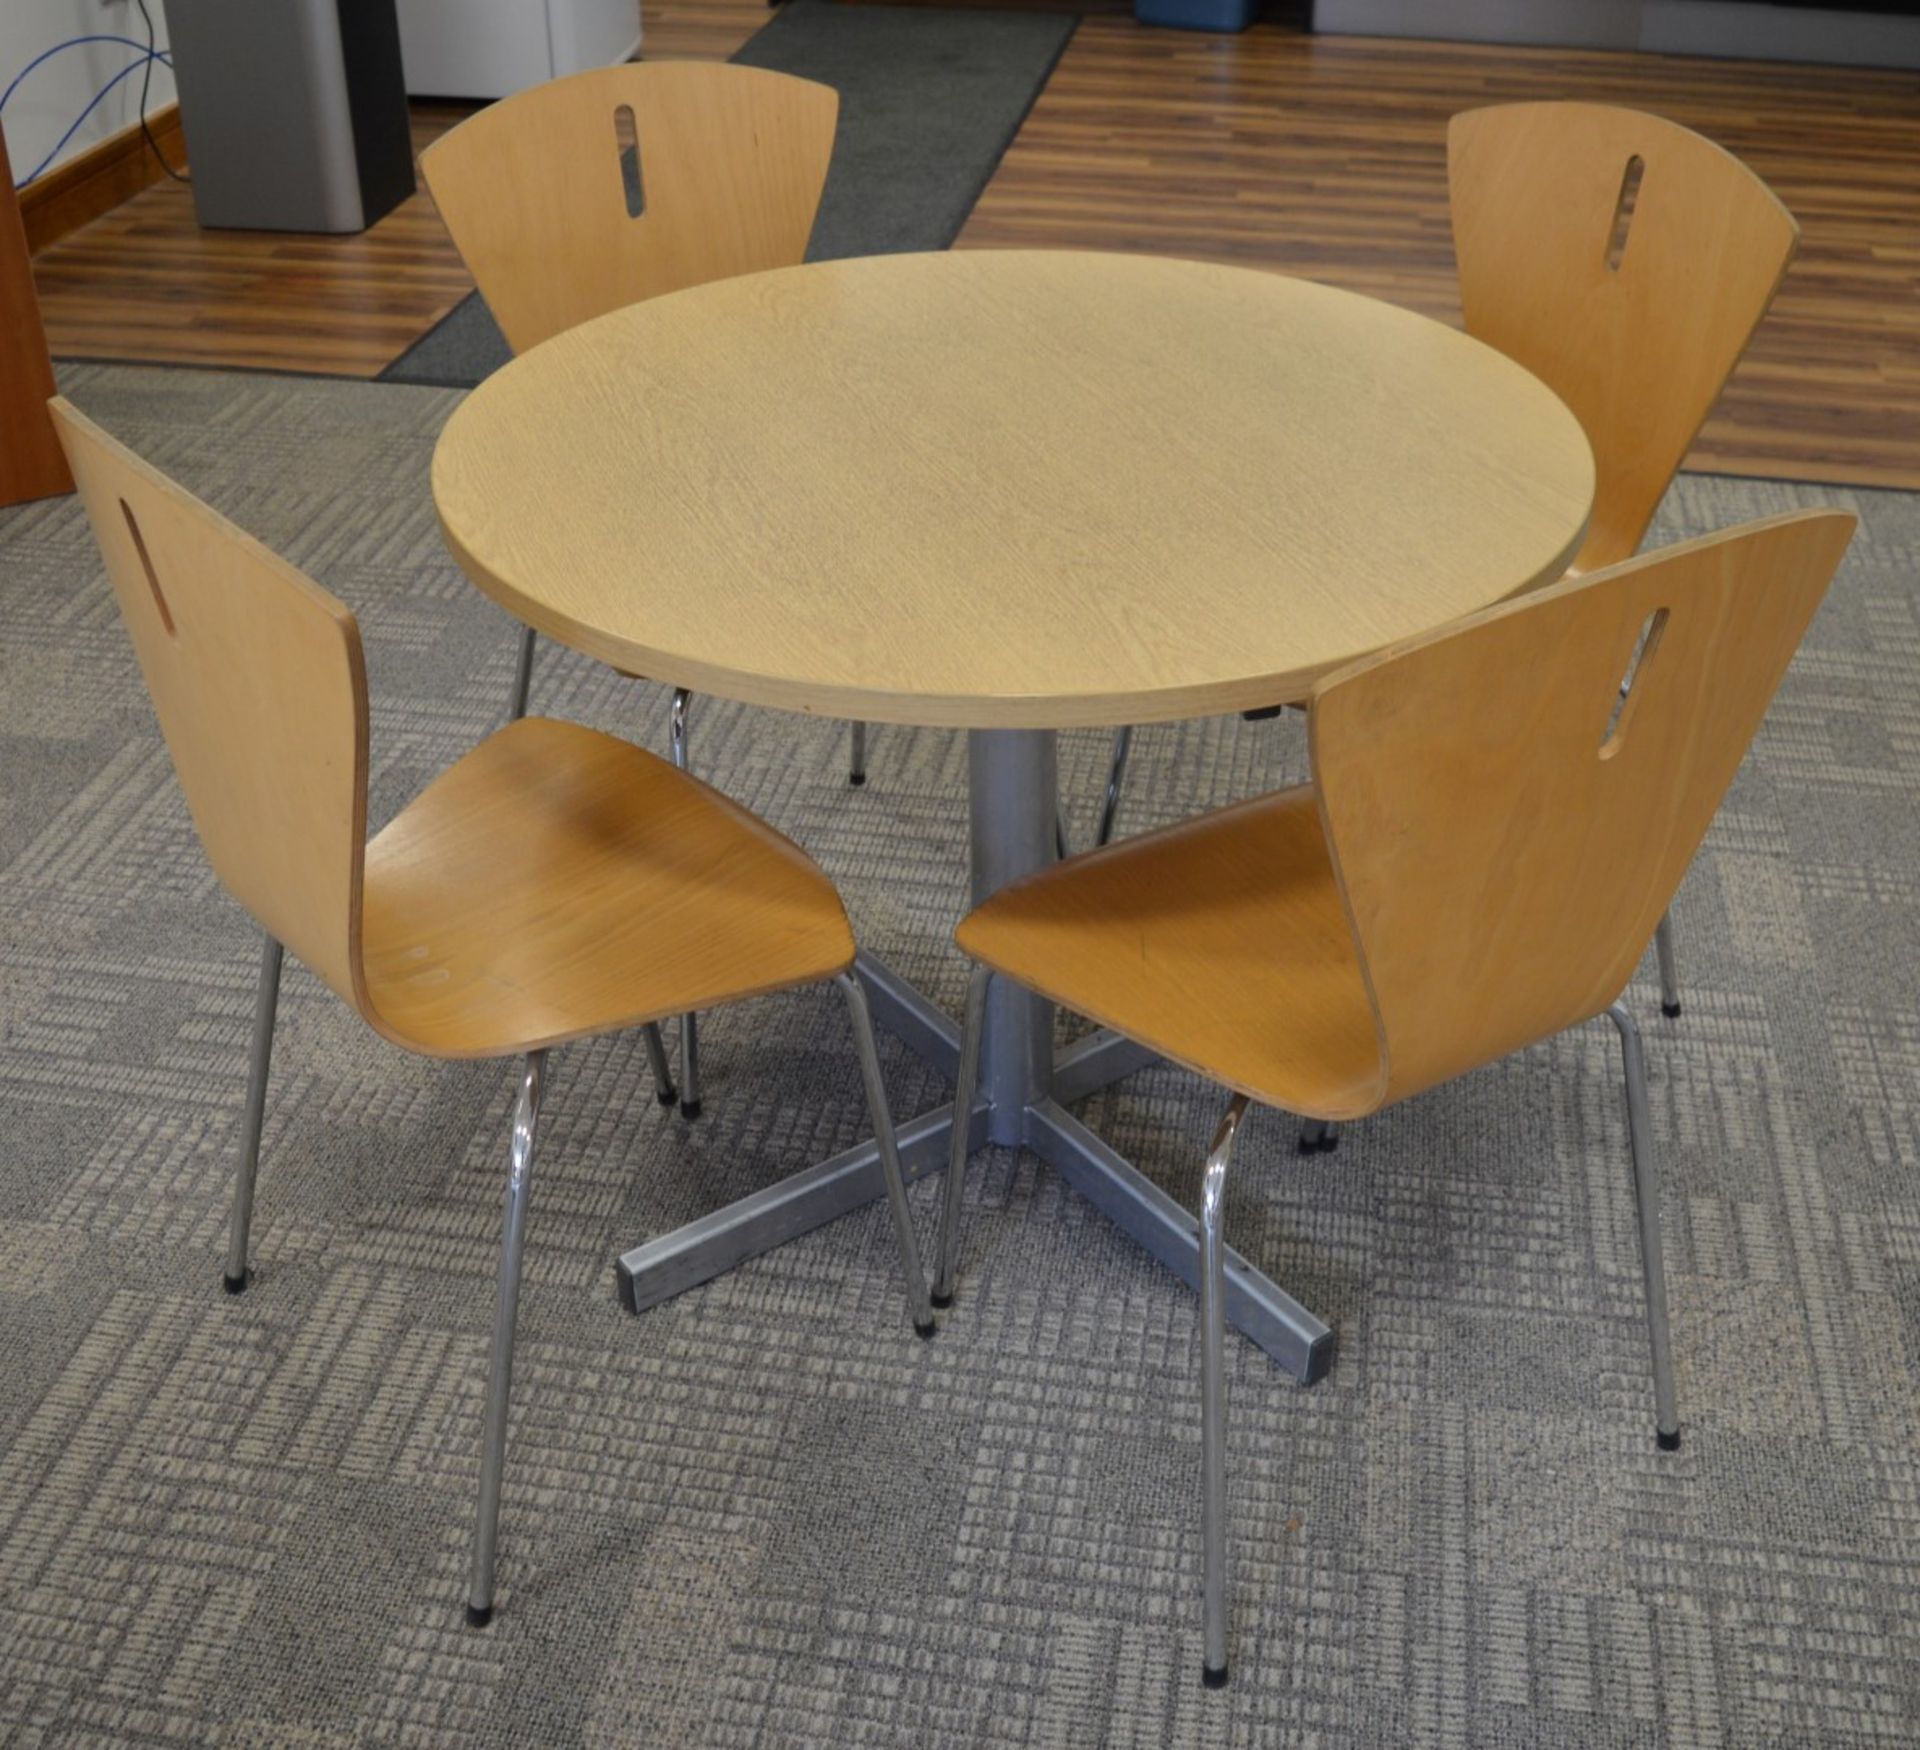 1 x Staff Room Table With Four Matching Chairs - Oak Table Finish and Beech Chairs - Contemporay